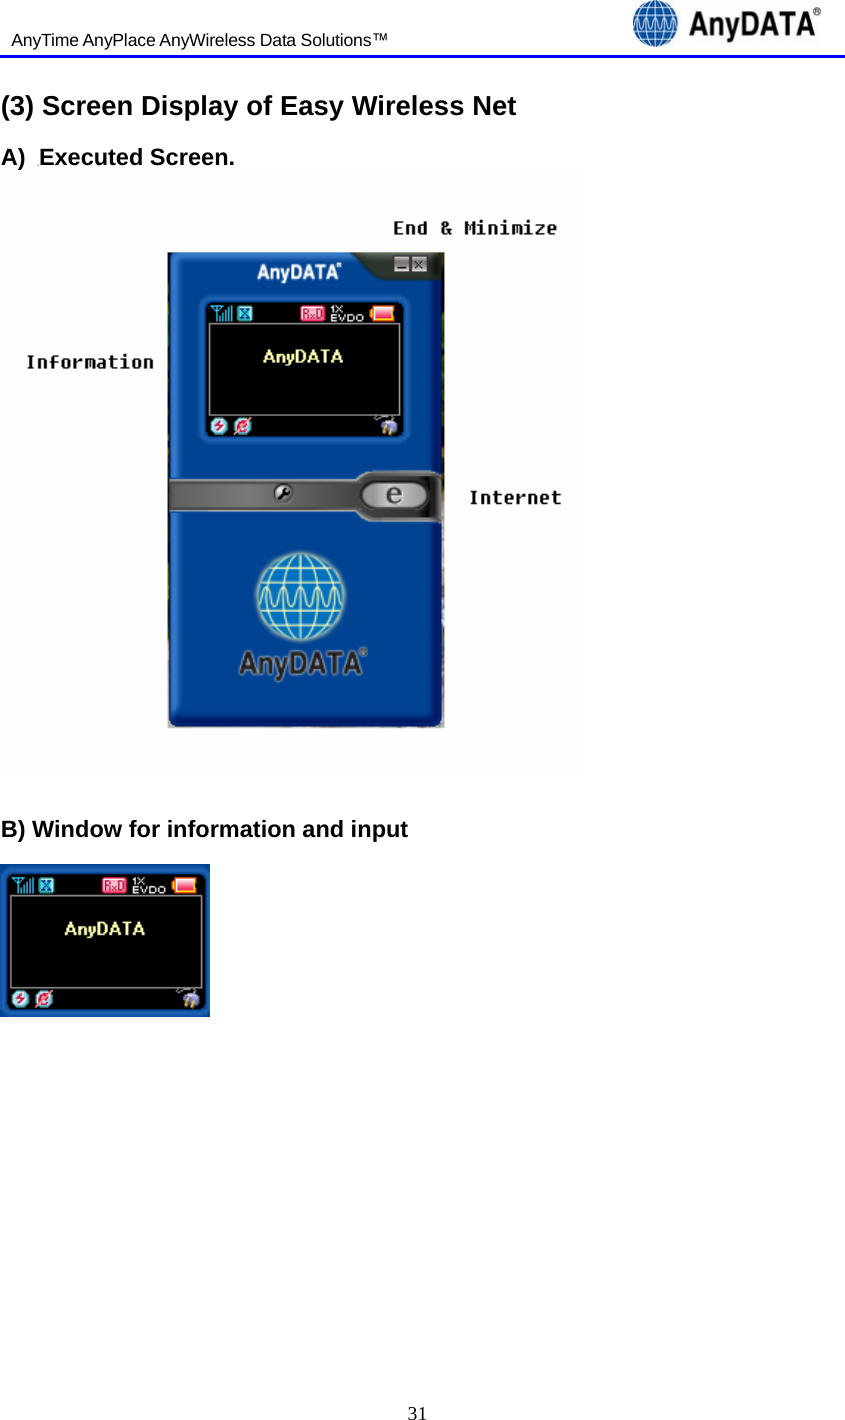   AnyTime AnyPlace AnyWireless Data Solutions™                                 31   (3) Screen Display of Easy Wireless Net  A)  Executed Screen.    B) Window for information and input       